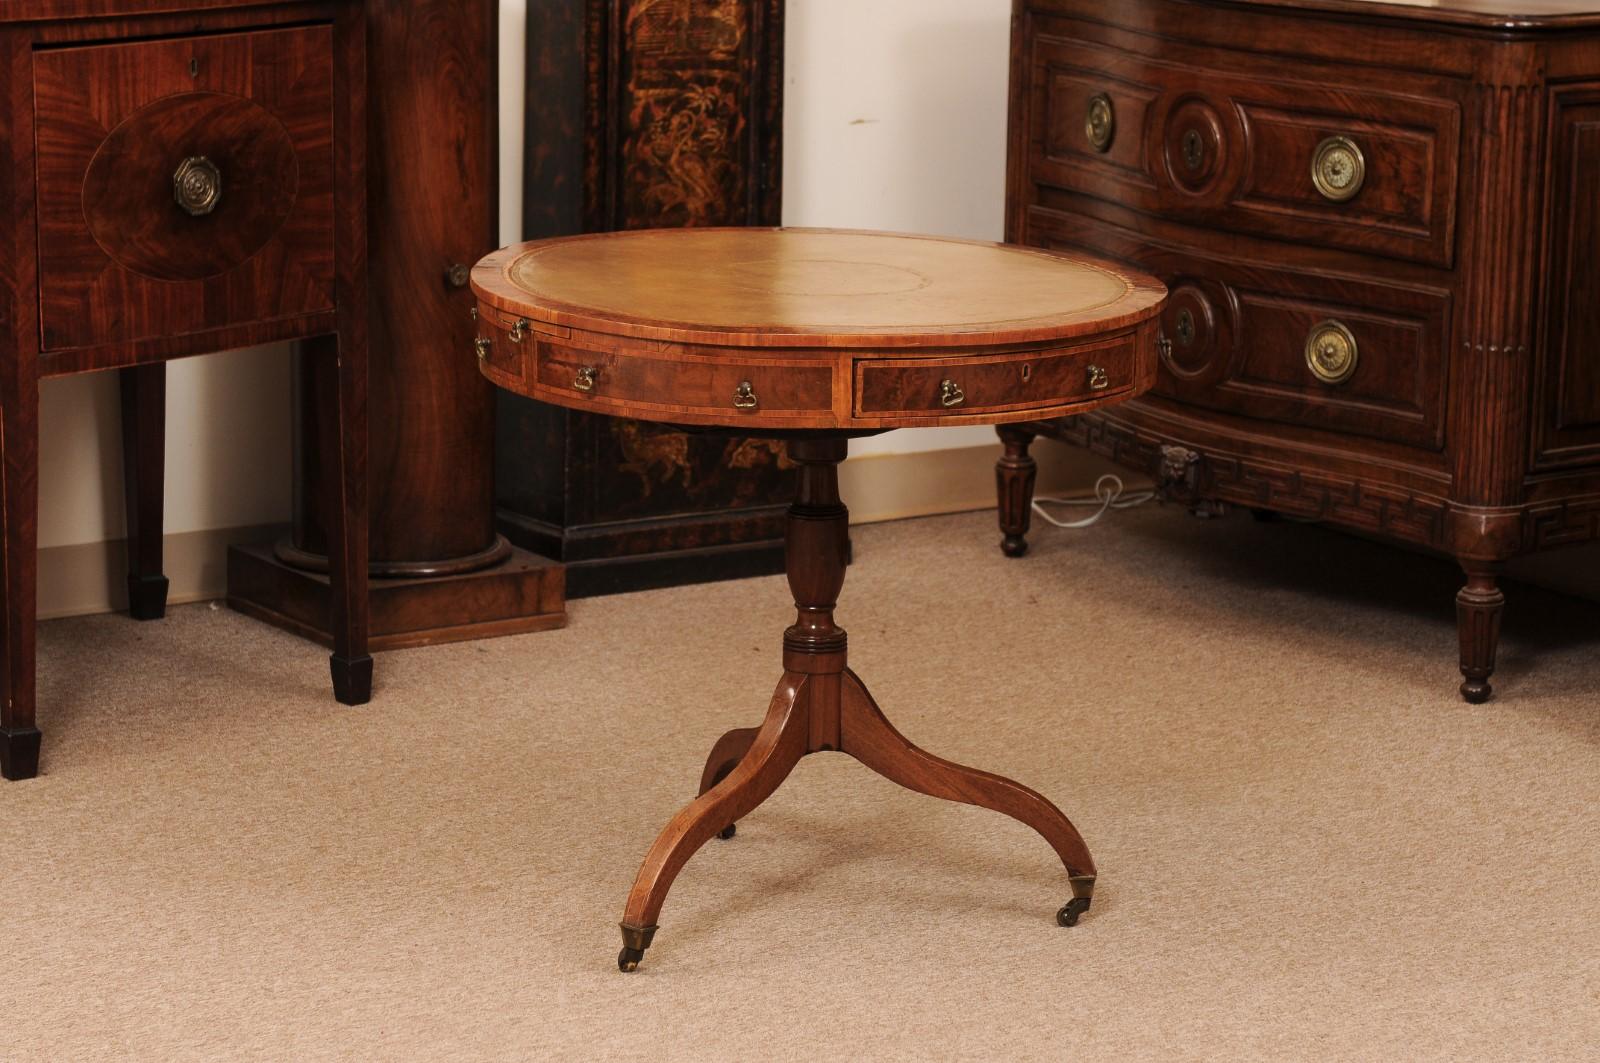 18th Century English Small Mulberry Drum Table with Inlay & Leather Top For Sale 5